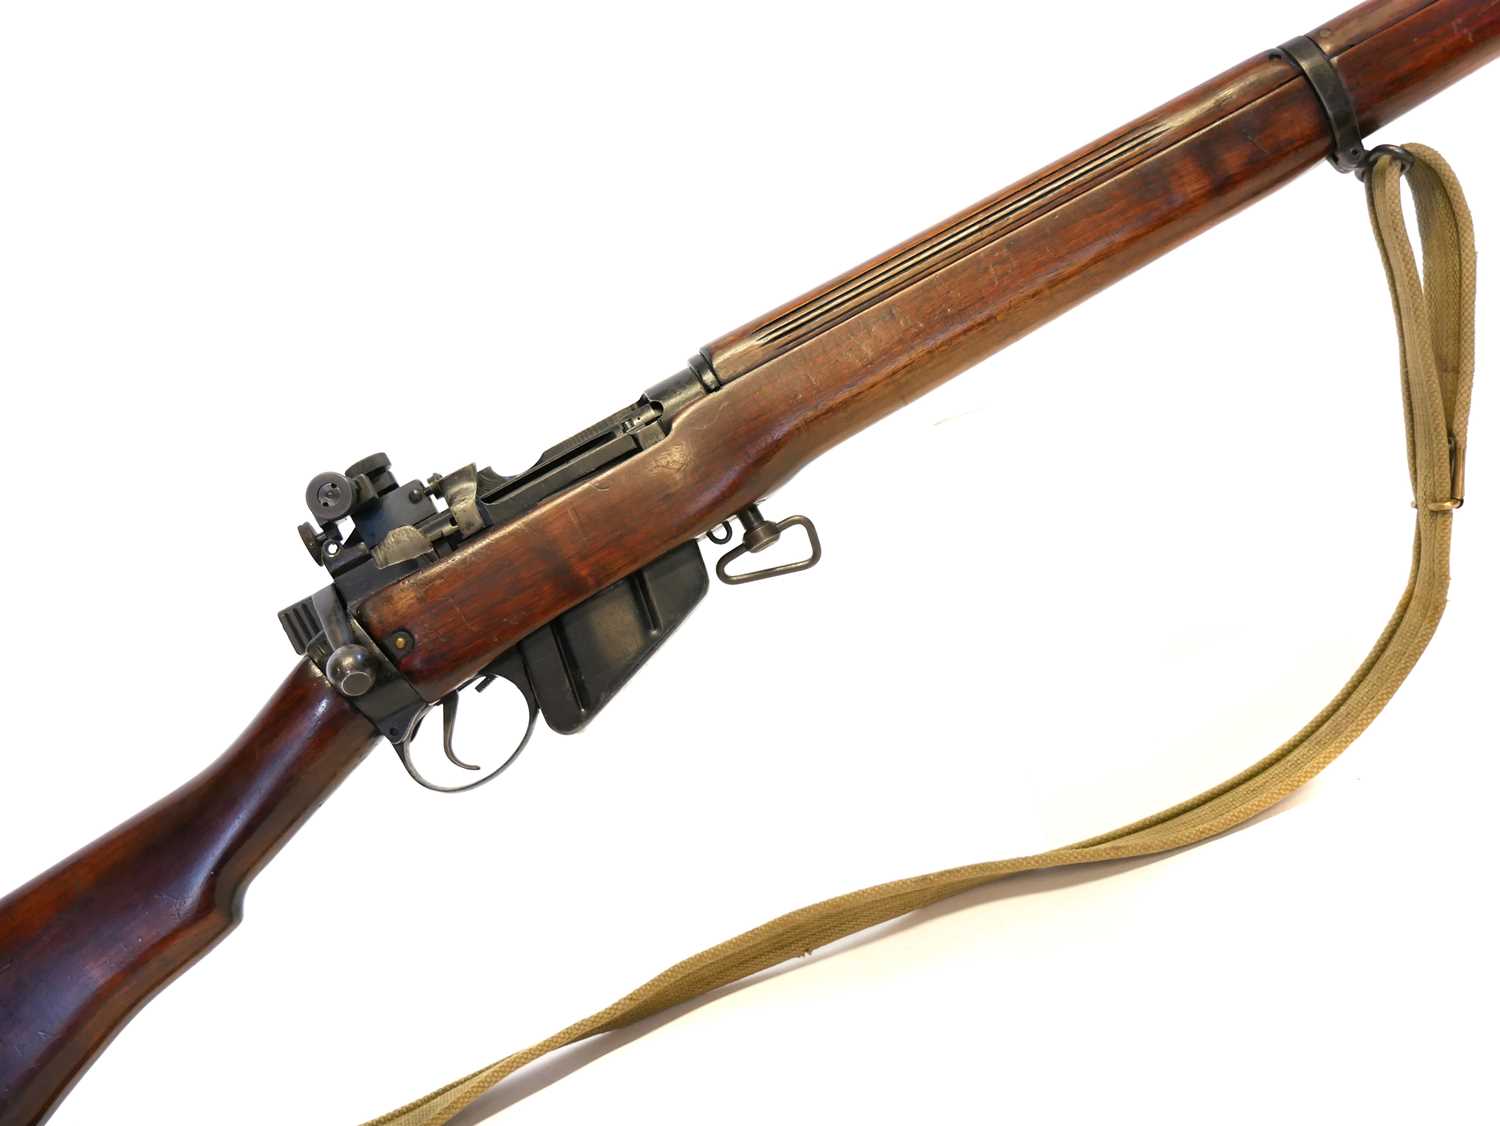 Sold at Auction: ENFIELD NO4 Mk 2 .303 RIFLE & A.J. PARKER SIGHT